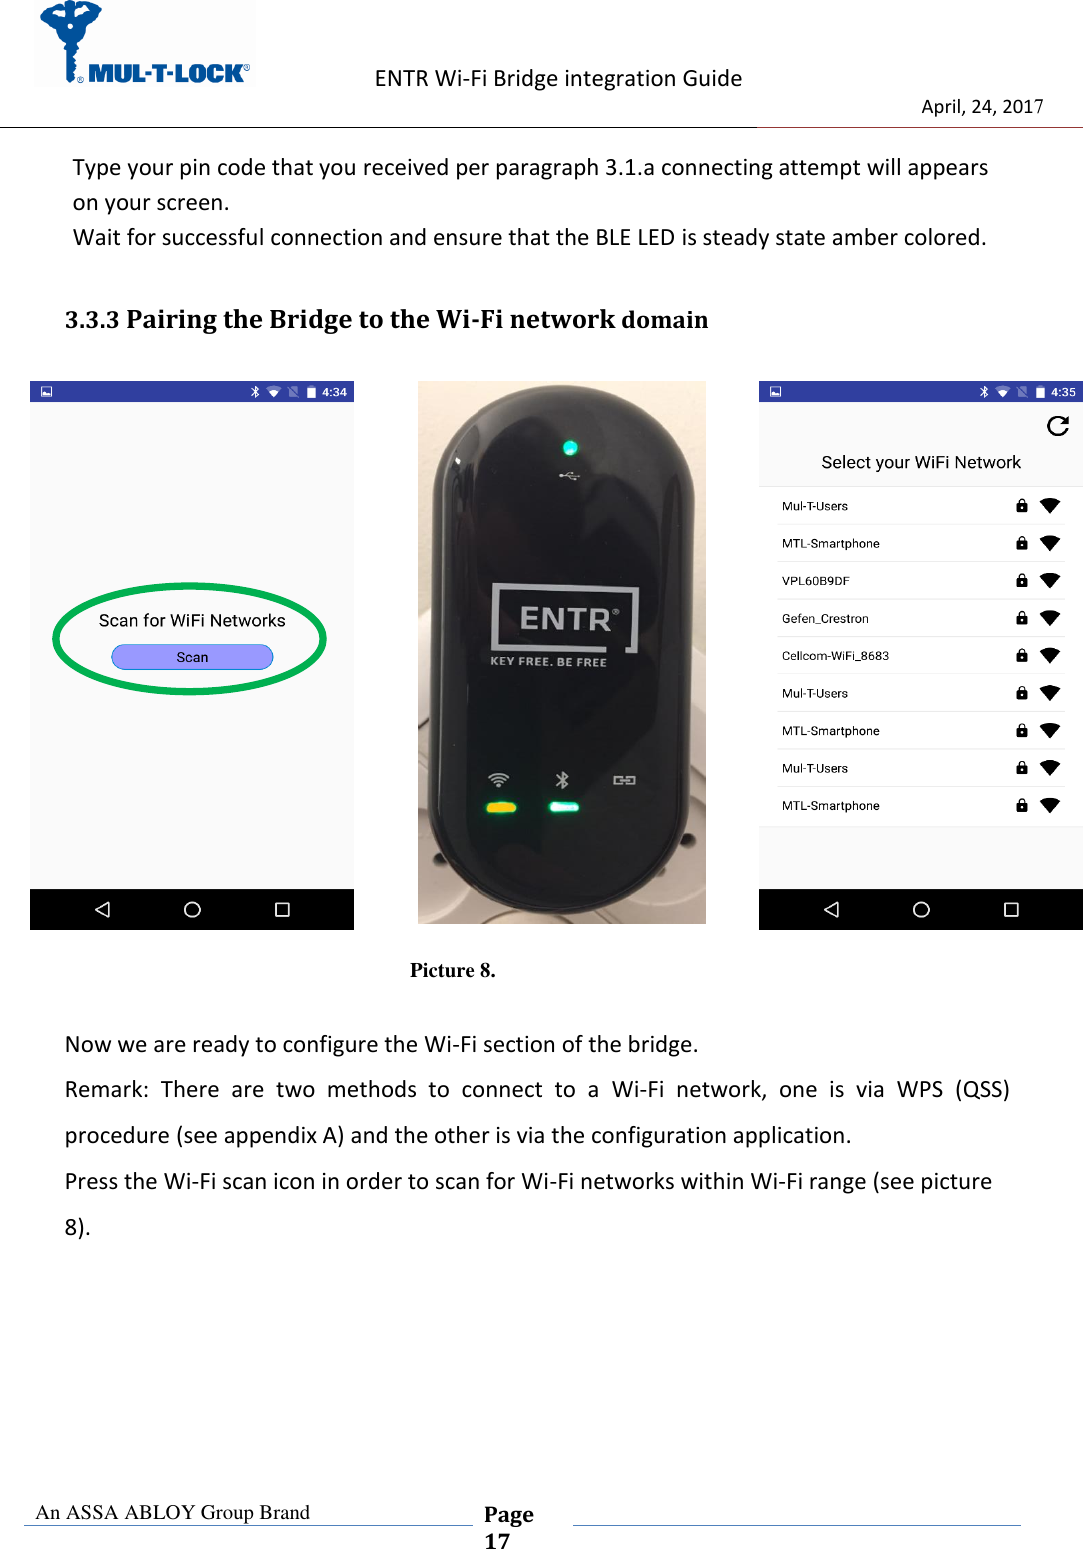                    ENTR Wi-Fi Bridge integration Guide                                  April, 24, 2017  An ASSA ABLOY Group Brand  Page 17    Type your pin code that you received per paragraph 3.1.a connecting attempt will appears on your screen. Wait for successful connection and ensure that the BLE LED is steady state amber colored. 3.3.3 Pairing the Bridge to the Wi-Fi network domain           Picture 8.  Now we are ready to configure the Wi-Fi section of the bridge. Remark:  There  are  two  methods  to  connect  to  a  Wi-Fi  network,  one  is  via  WPS  (QSS)     procedure (see appendix A) and the other is via the configuration application. Press the Wi-Fi scan icon in order to scan for Wi-Fi networks within Wi-Fi range (see picture 8).     